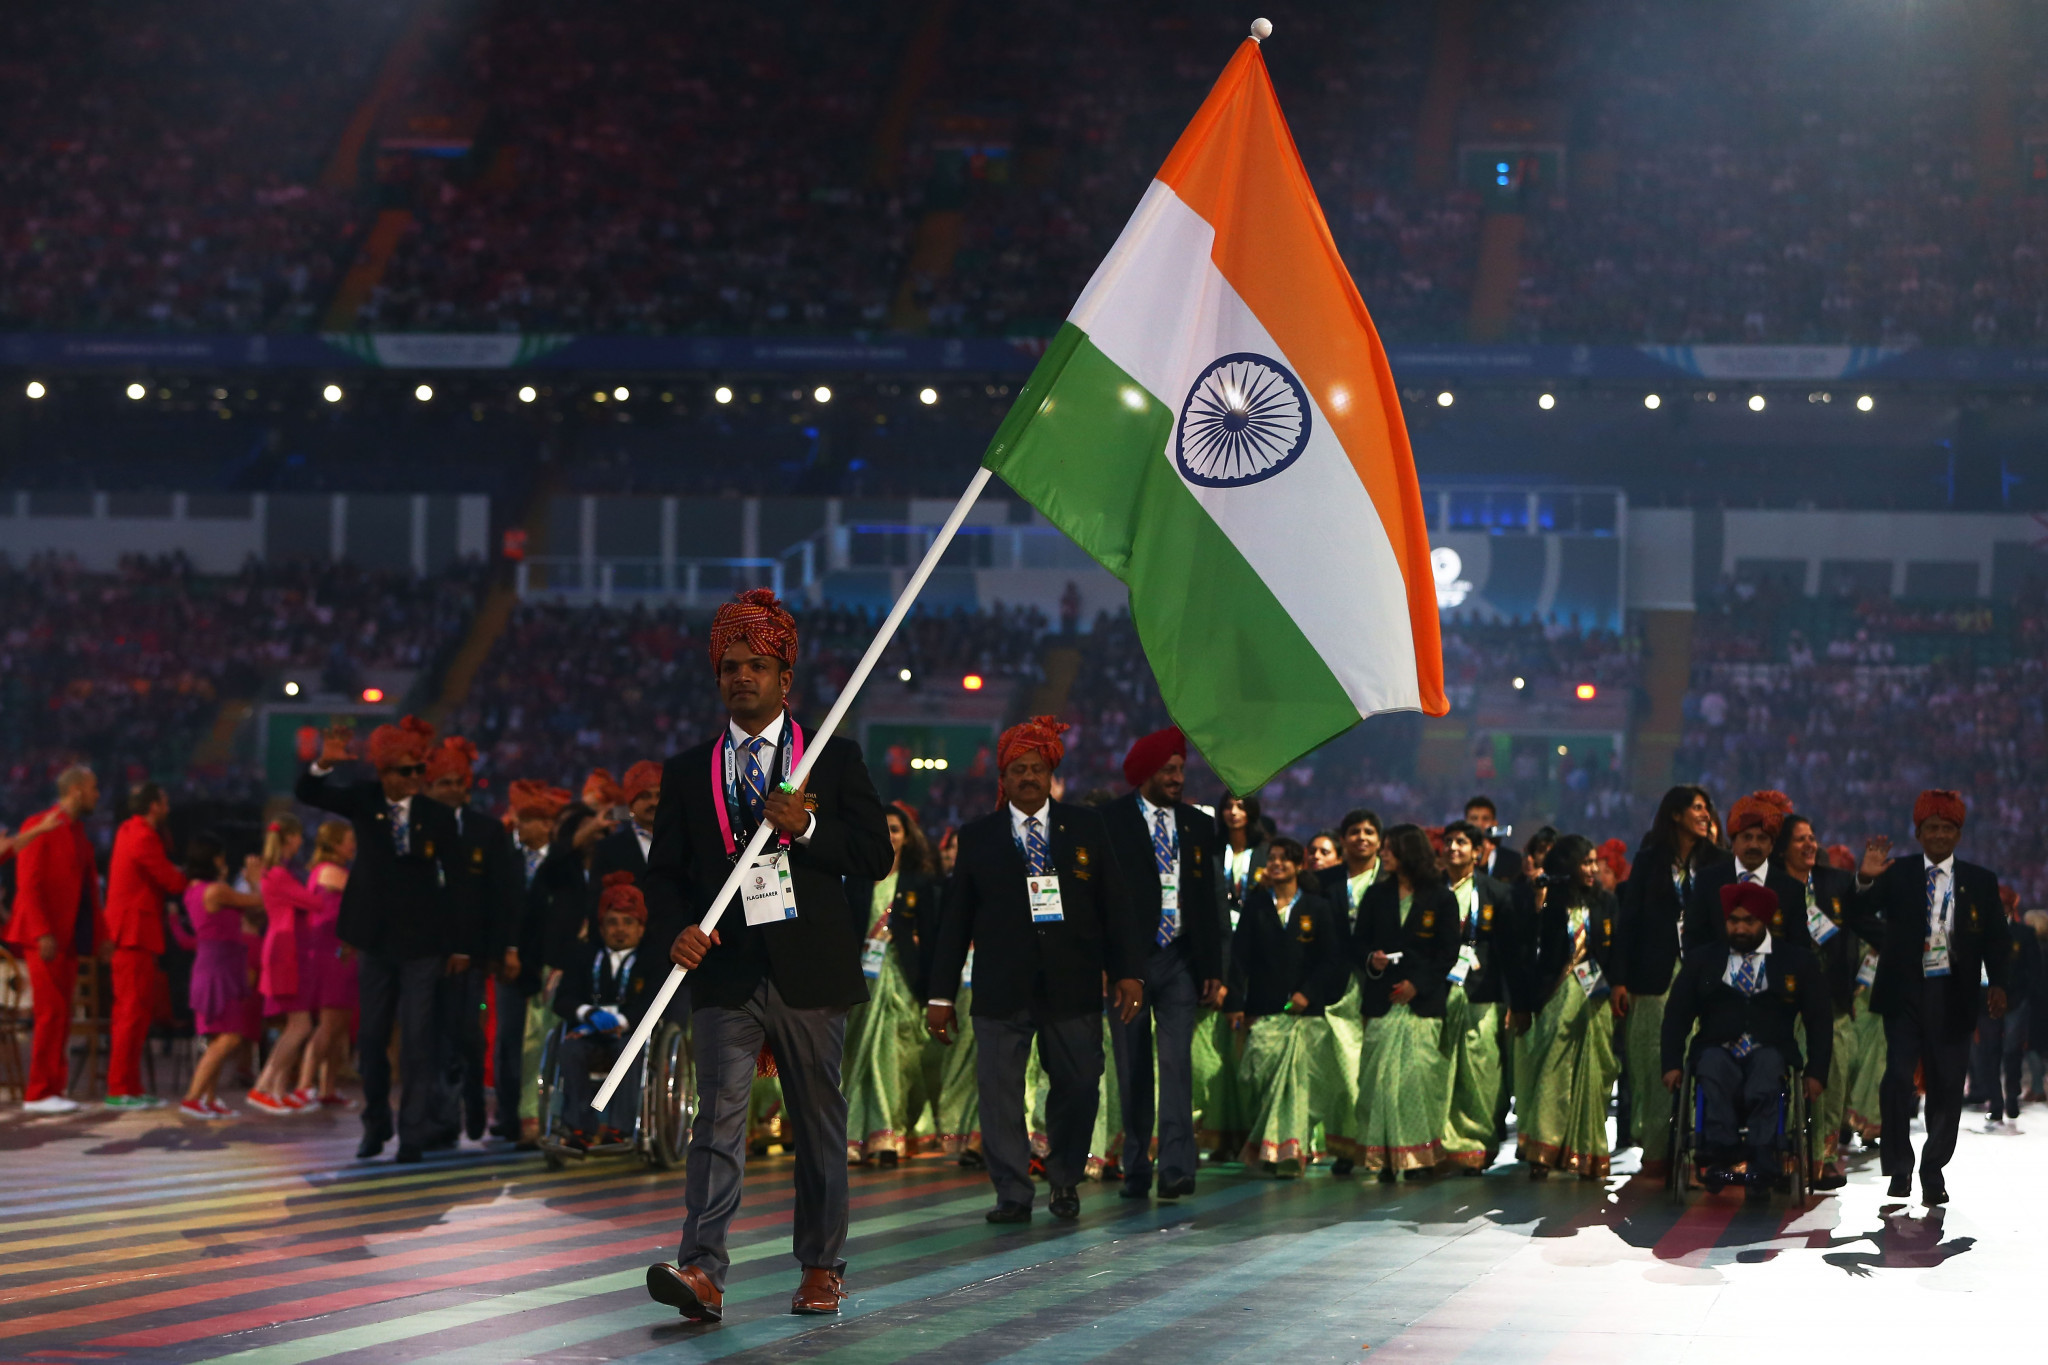 Indian medallists at Birmingham 2022 set to receive financial rewards from IOA